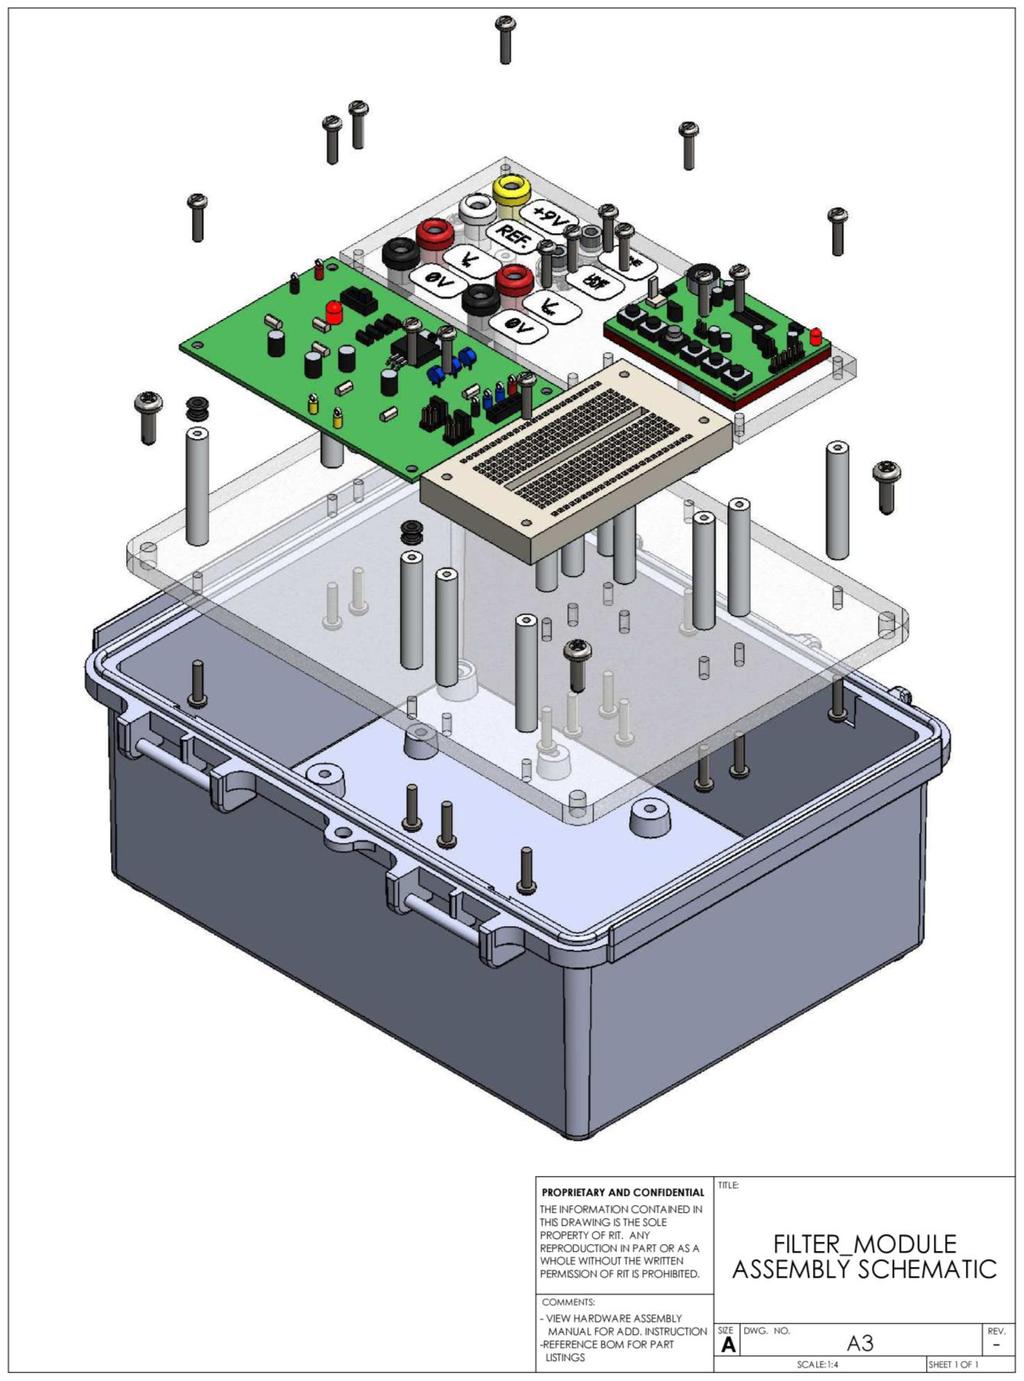 P336 HARDWARE ASSEMBLY SCHEMATIC